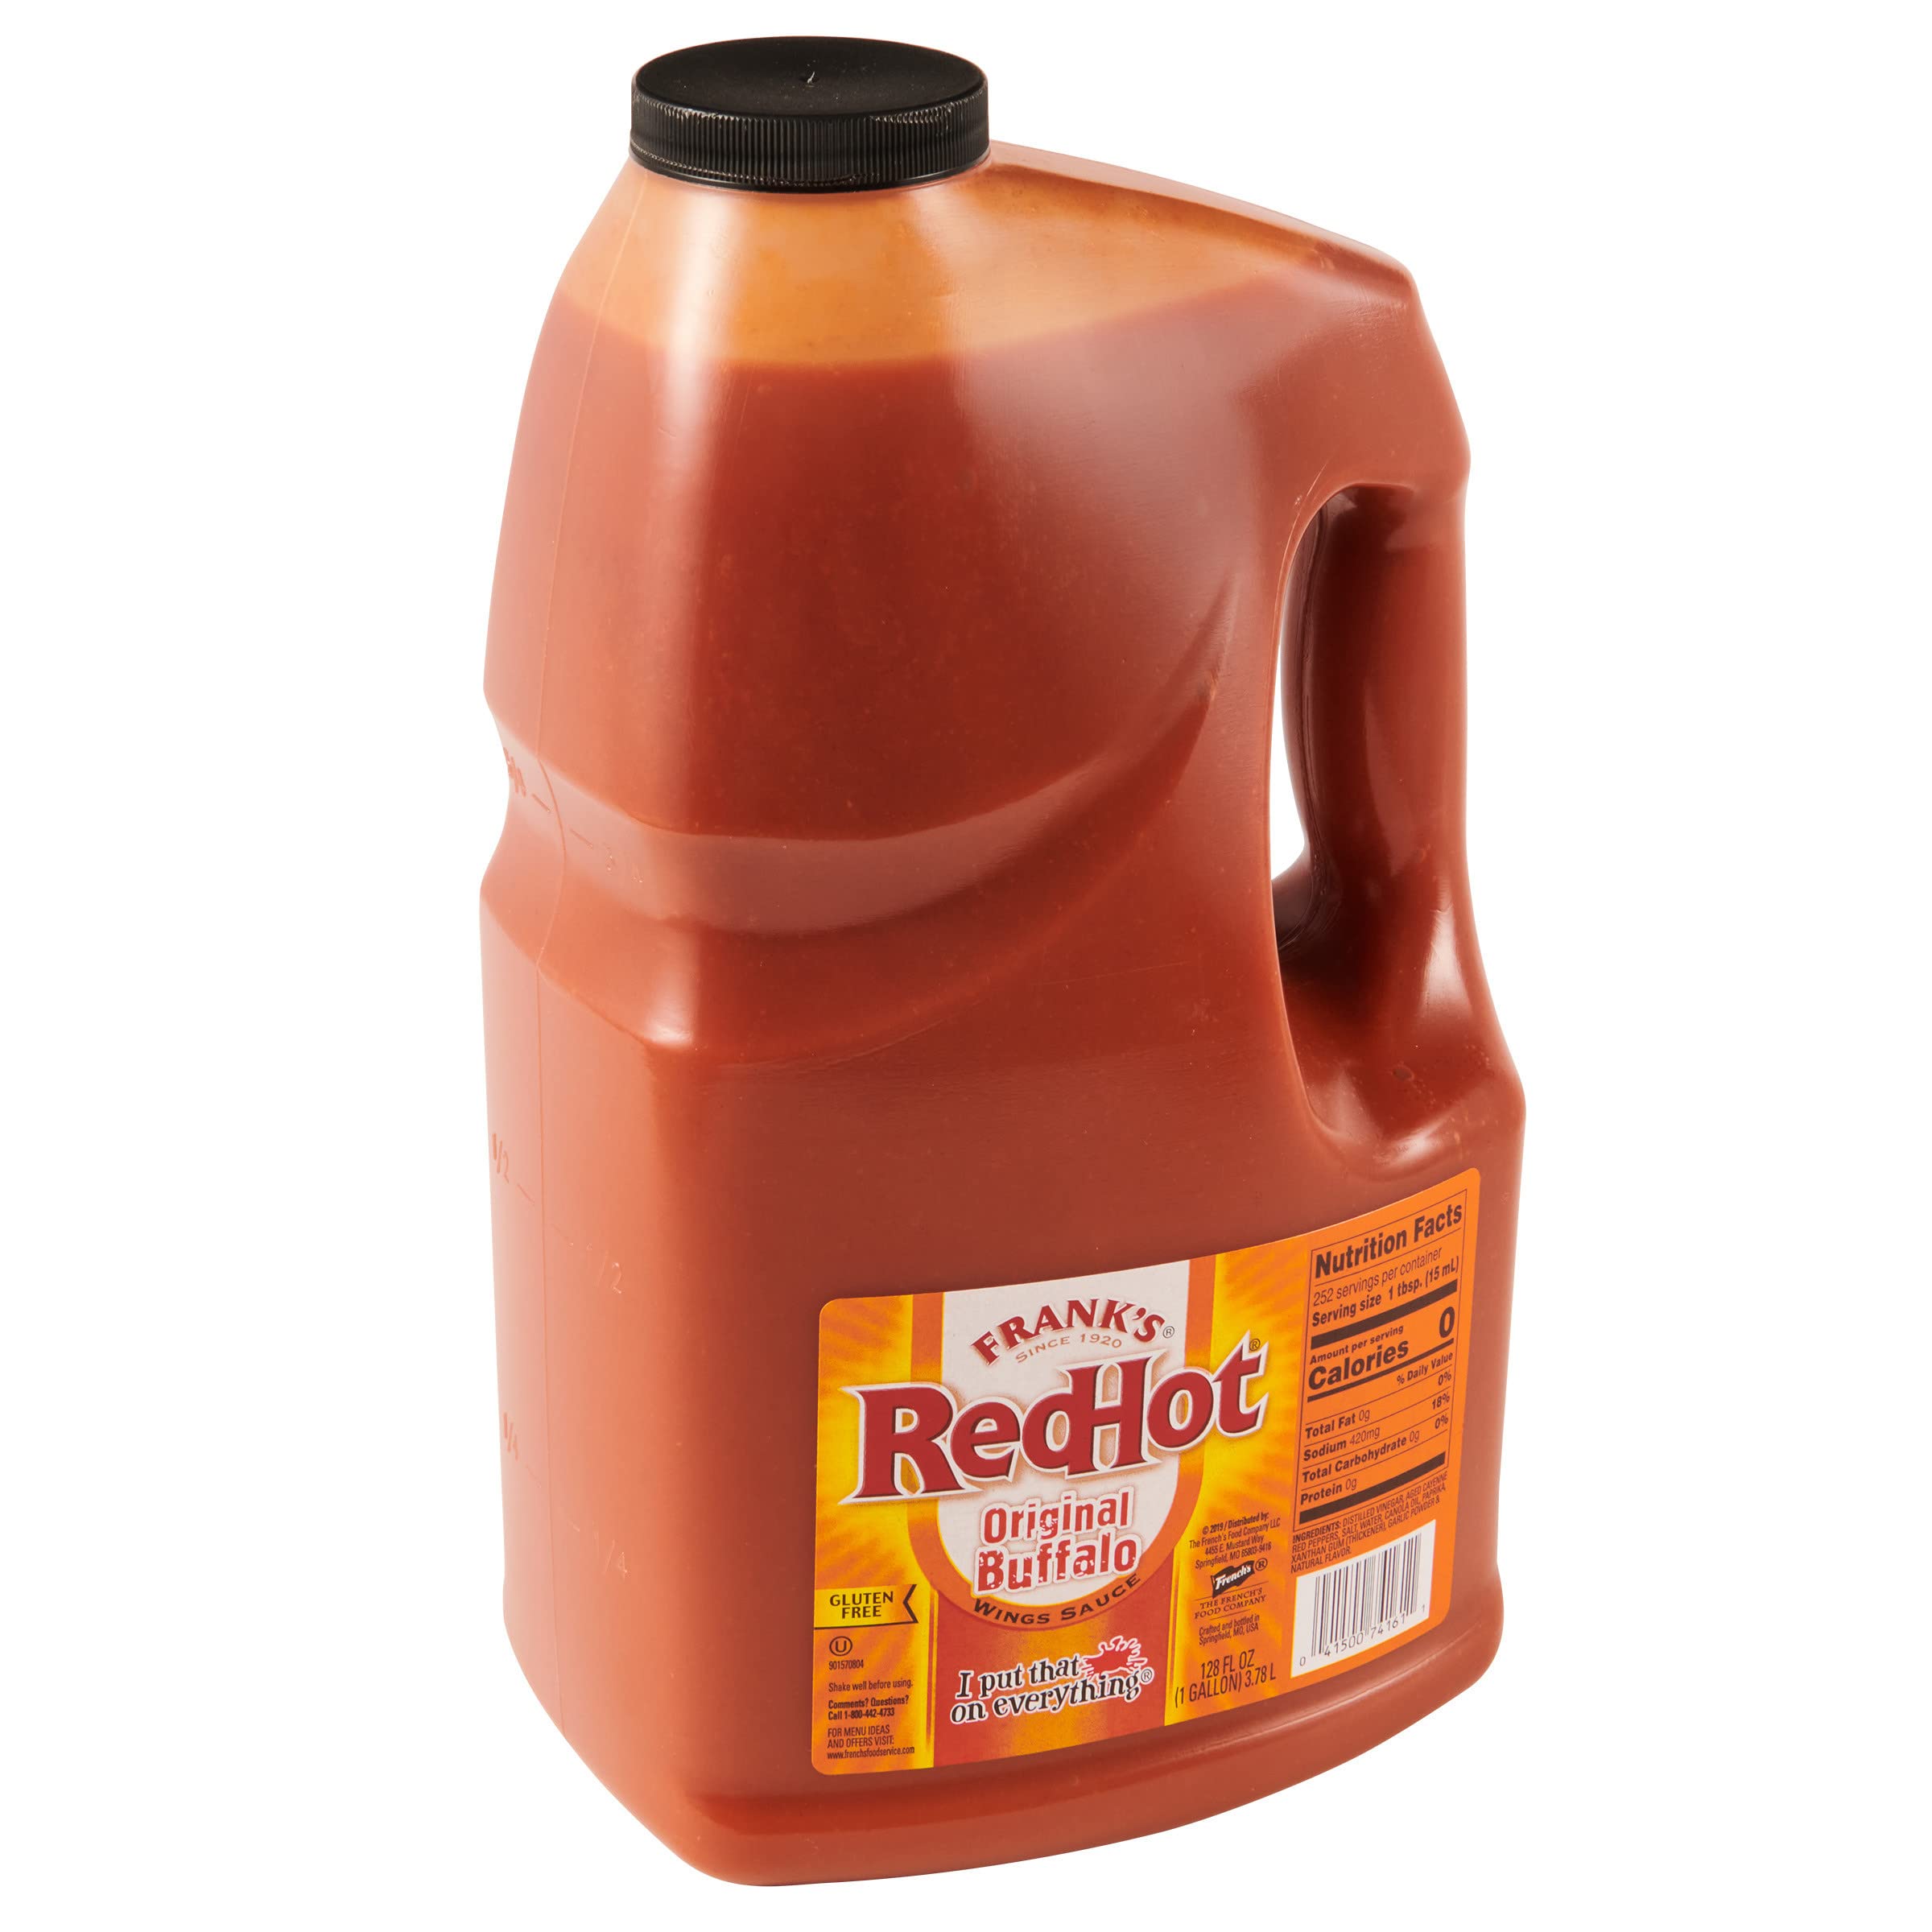 Frank's RedHot Original Buffalo Wings Sauce, 1 gal - 1 Gallon Bulk Container of Buffalo Hot Sauce with a Bold, Spicy Flavor Perfect for Wings, Dressings, Dips and More $11.91